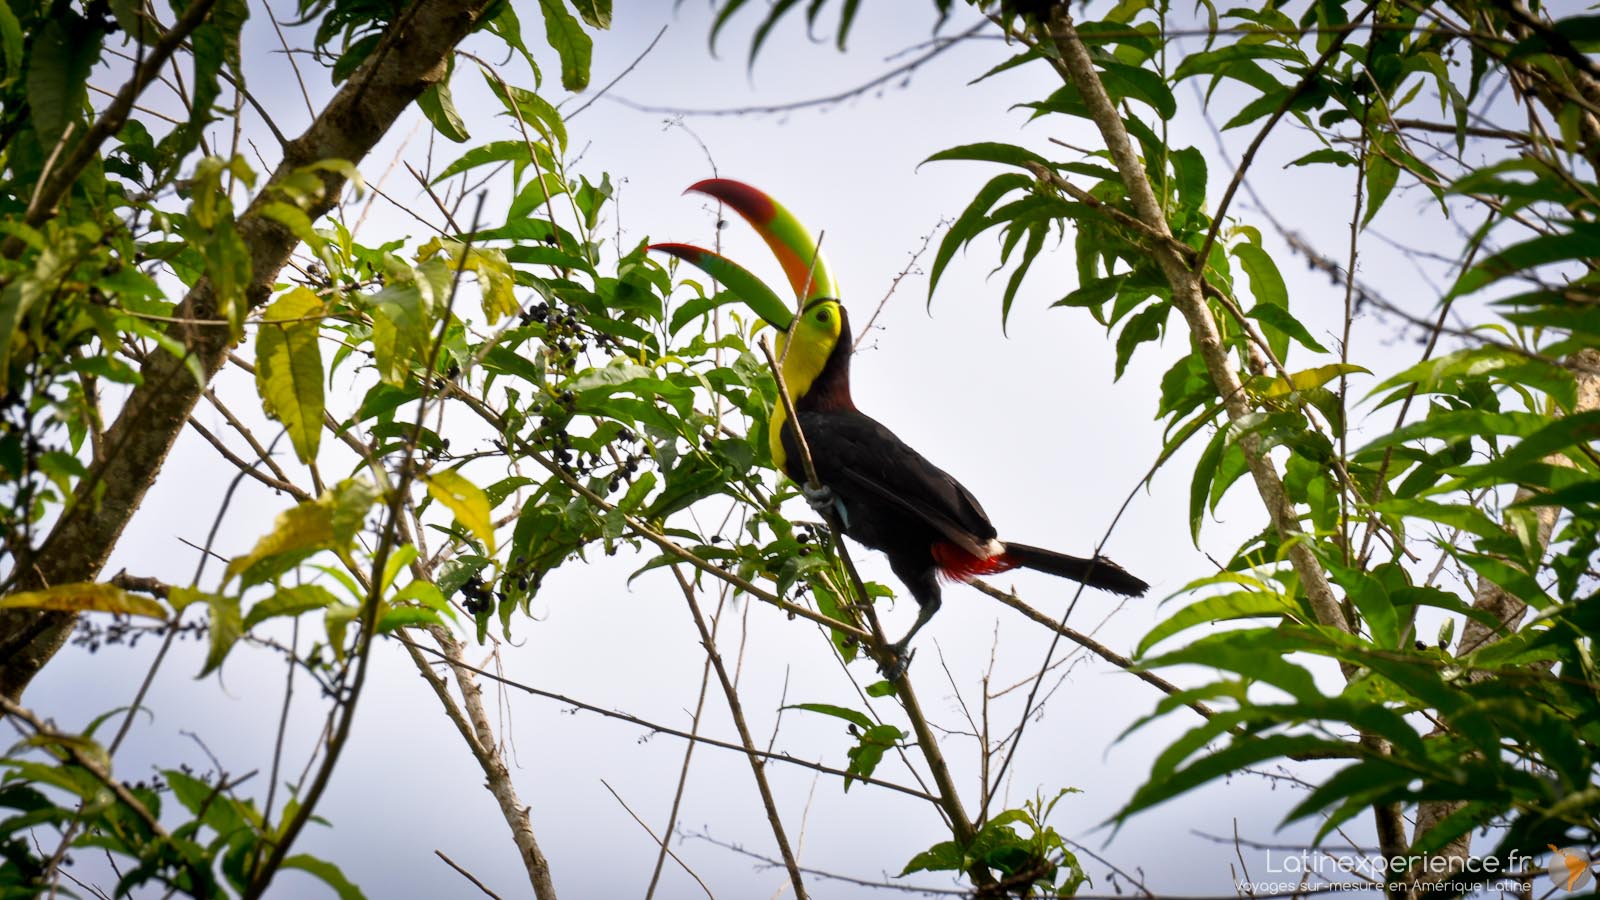 Costa Rica - Macaw Lodge - Toucan - Latinexperience voyages